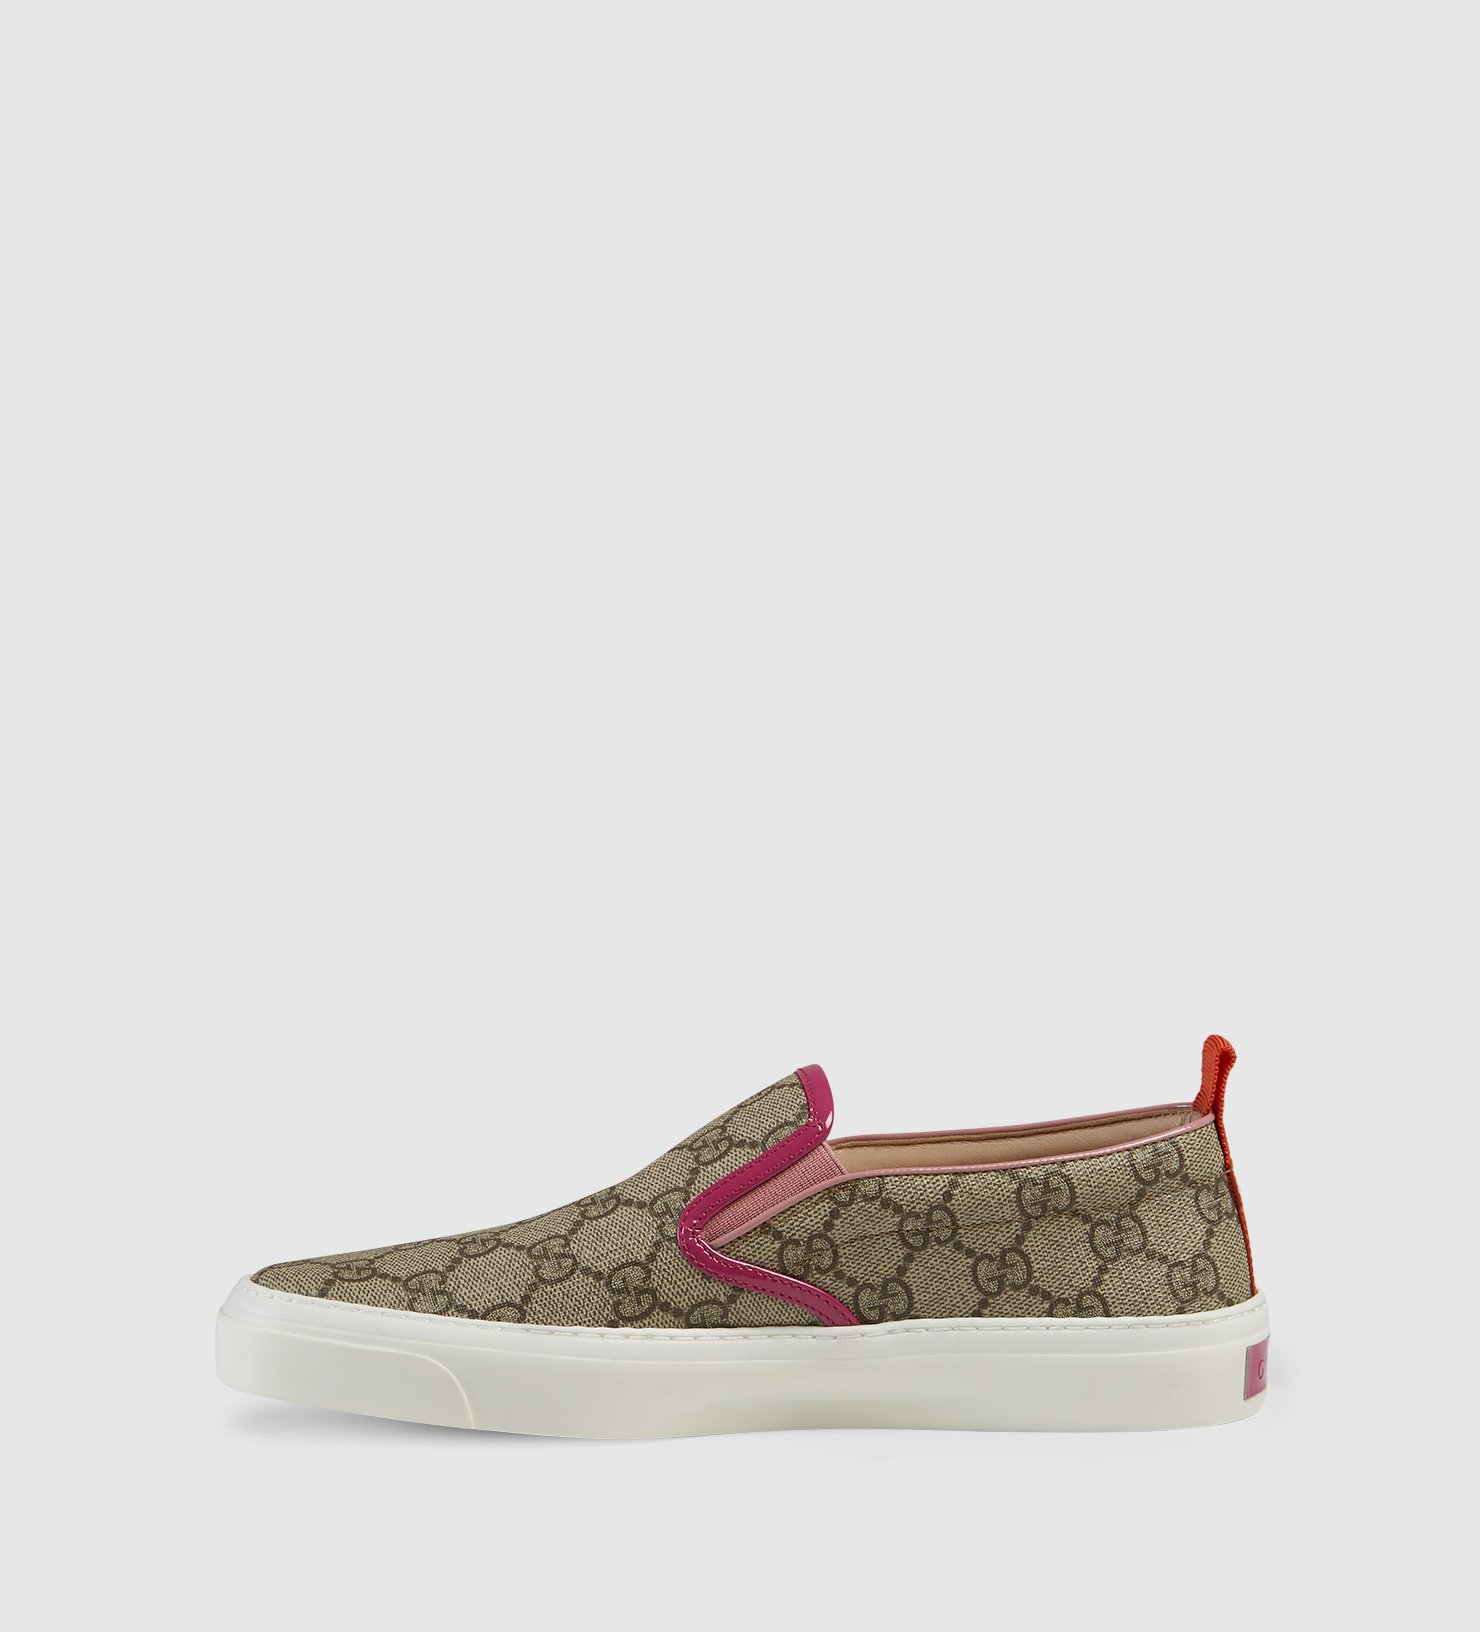 gucci slip on sneakers womens cheap online